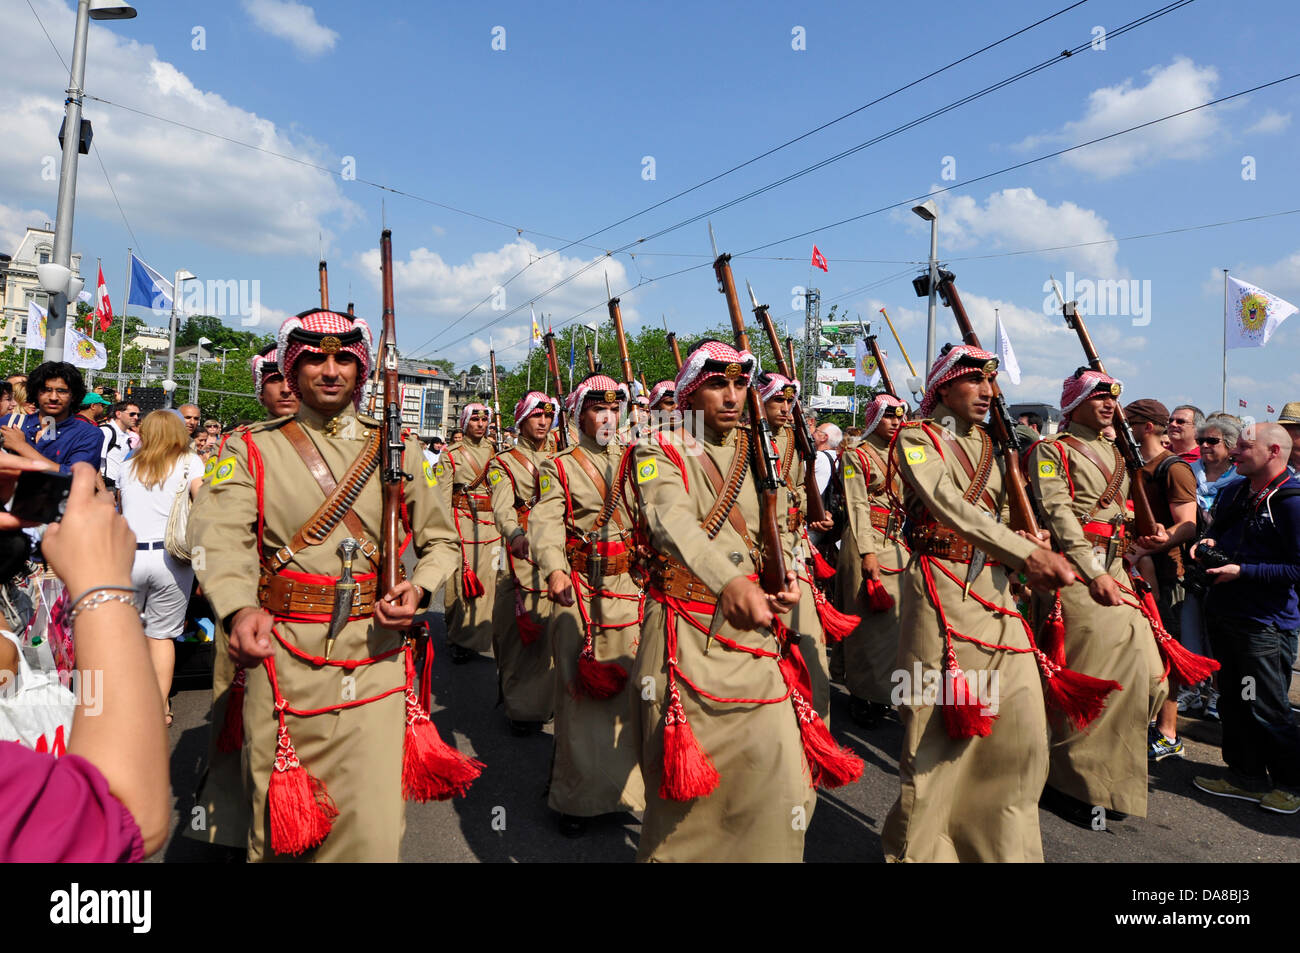 Zurich, Switzerland, 7th July 2013, in the center of Zurich,  one of the biggest European festival continues into the third day. Parties, Carnival, fairground attractions, market, food and drink stands everywhere.  - show of Saudi guard of honour Credit:  momo leif/Alamy Live News Stock Photo